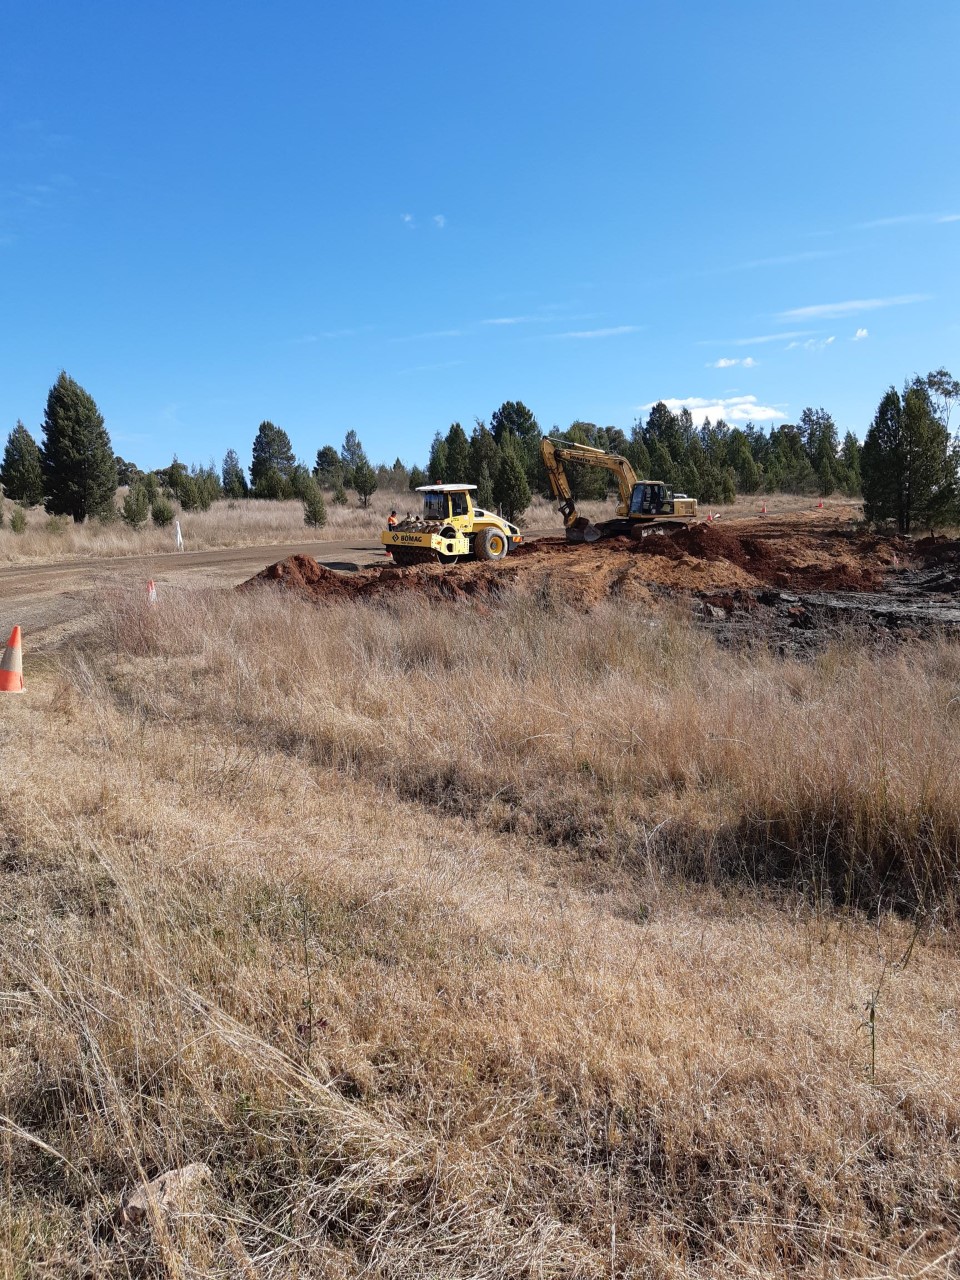 Work getting underway on the Lowes Creek Road deviation